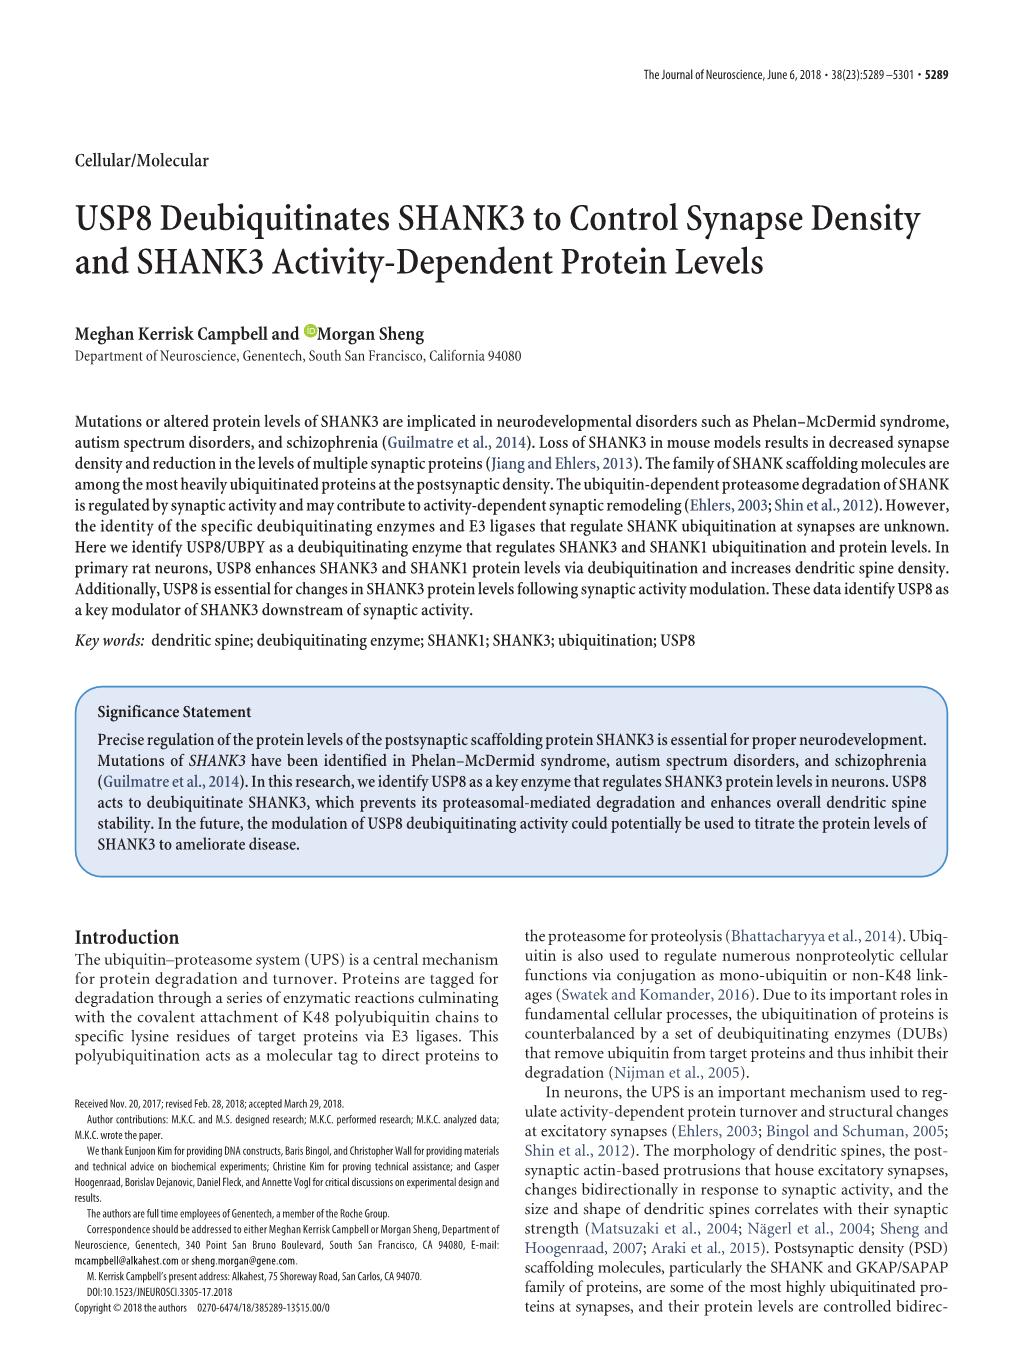 USP8 Deubiquitinates SHANK3 to Control Synapse Density and SHANK3 Activity-Dependent Protein Levels